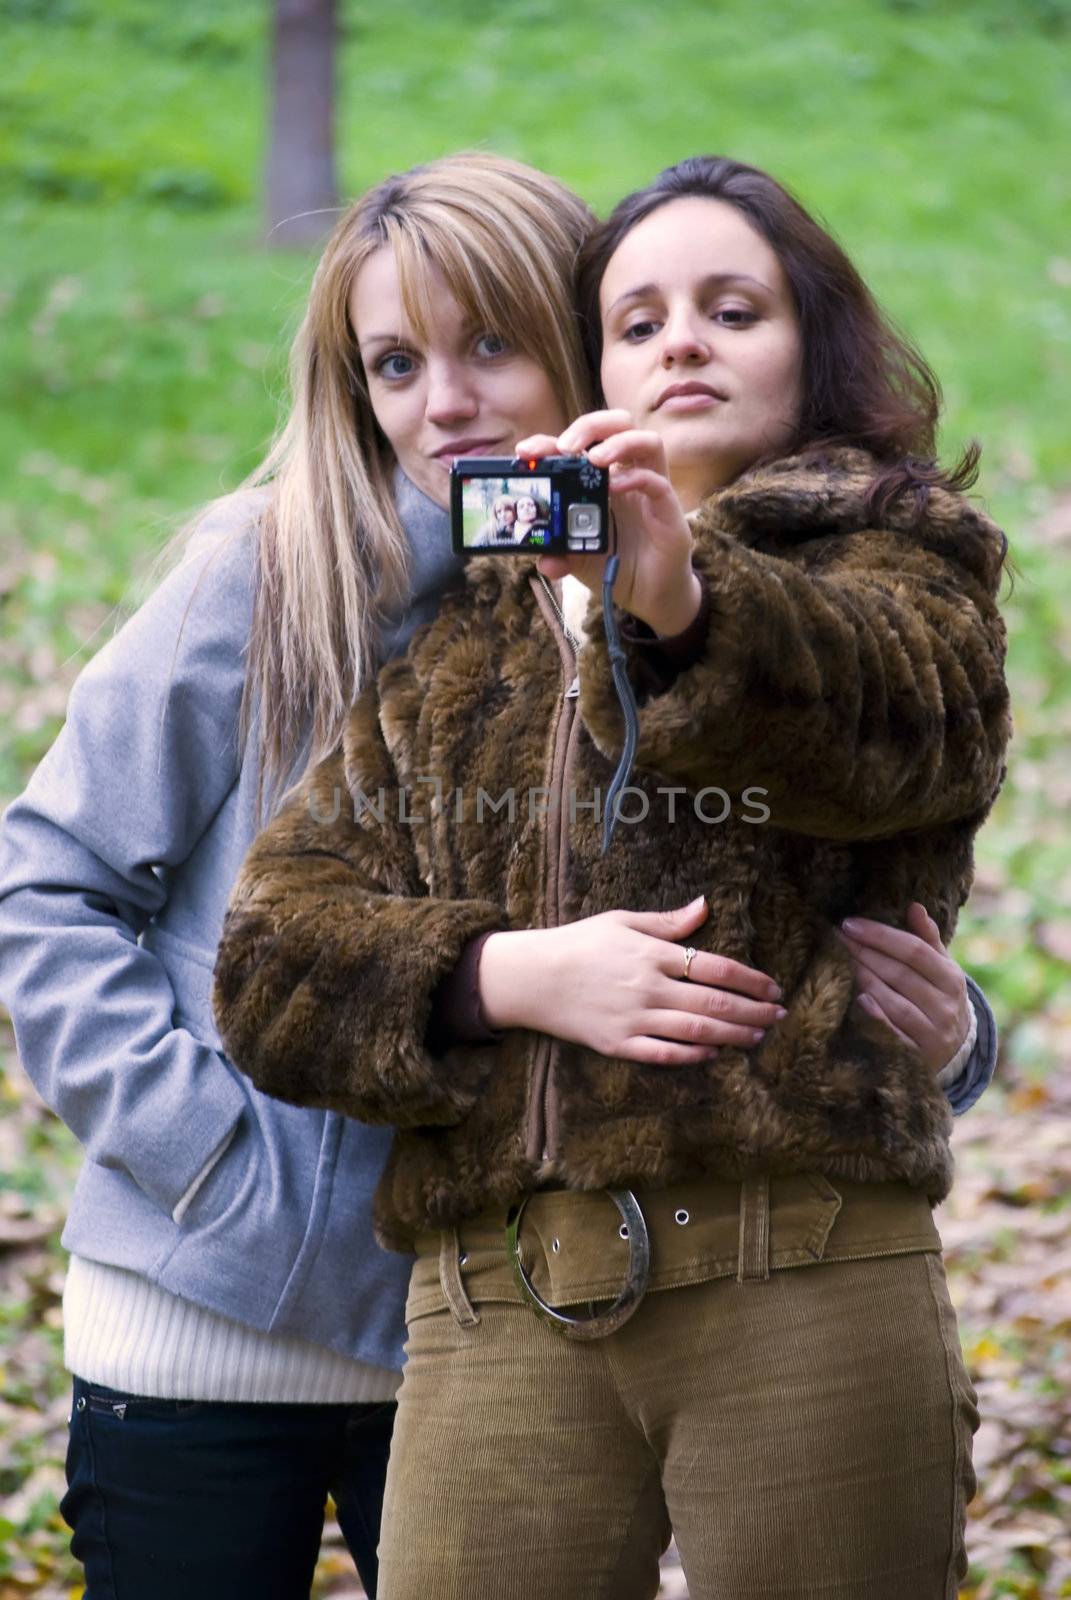 cute girls making photo session in autumn